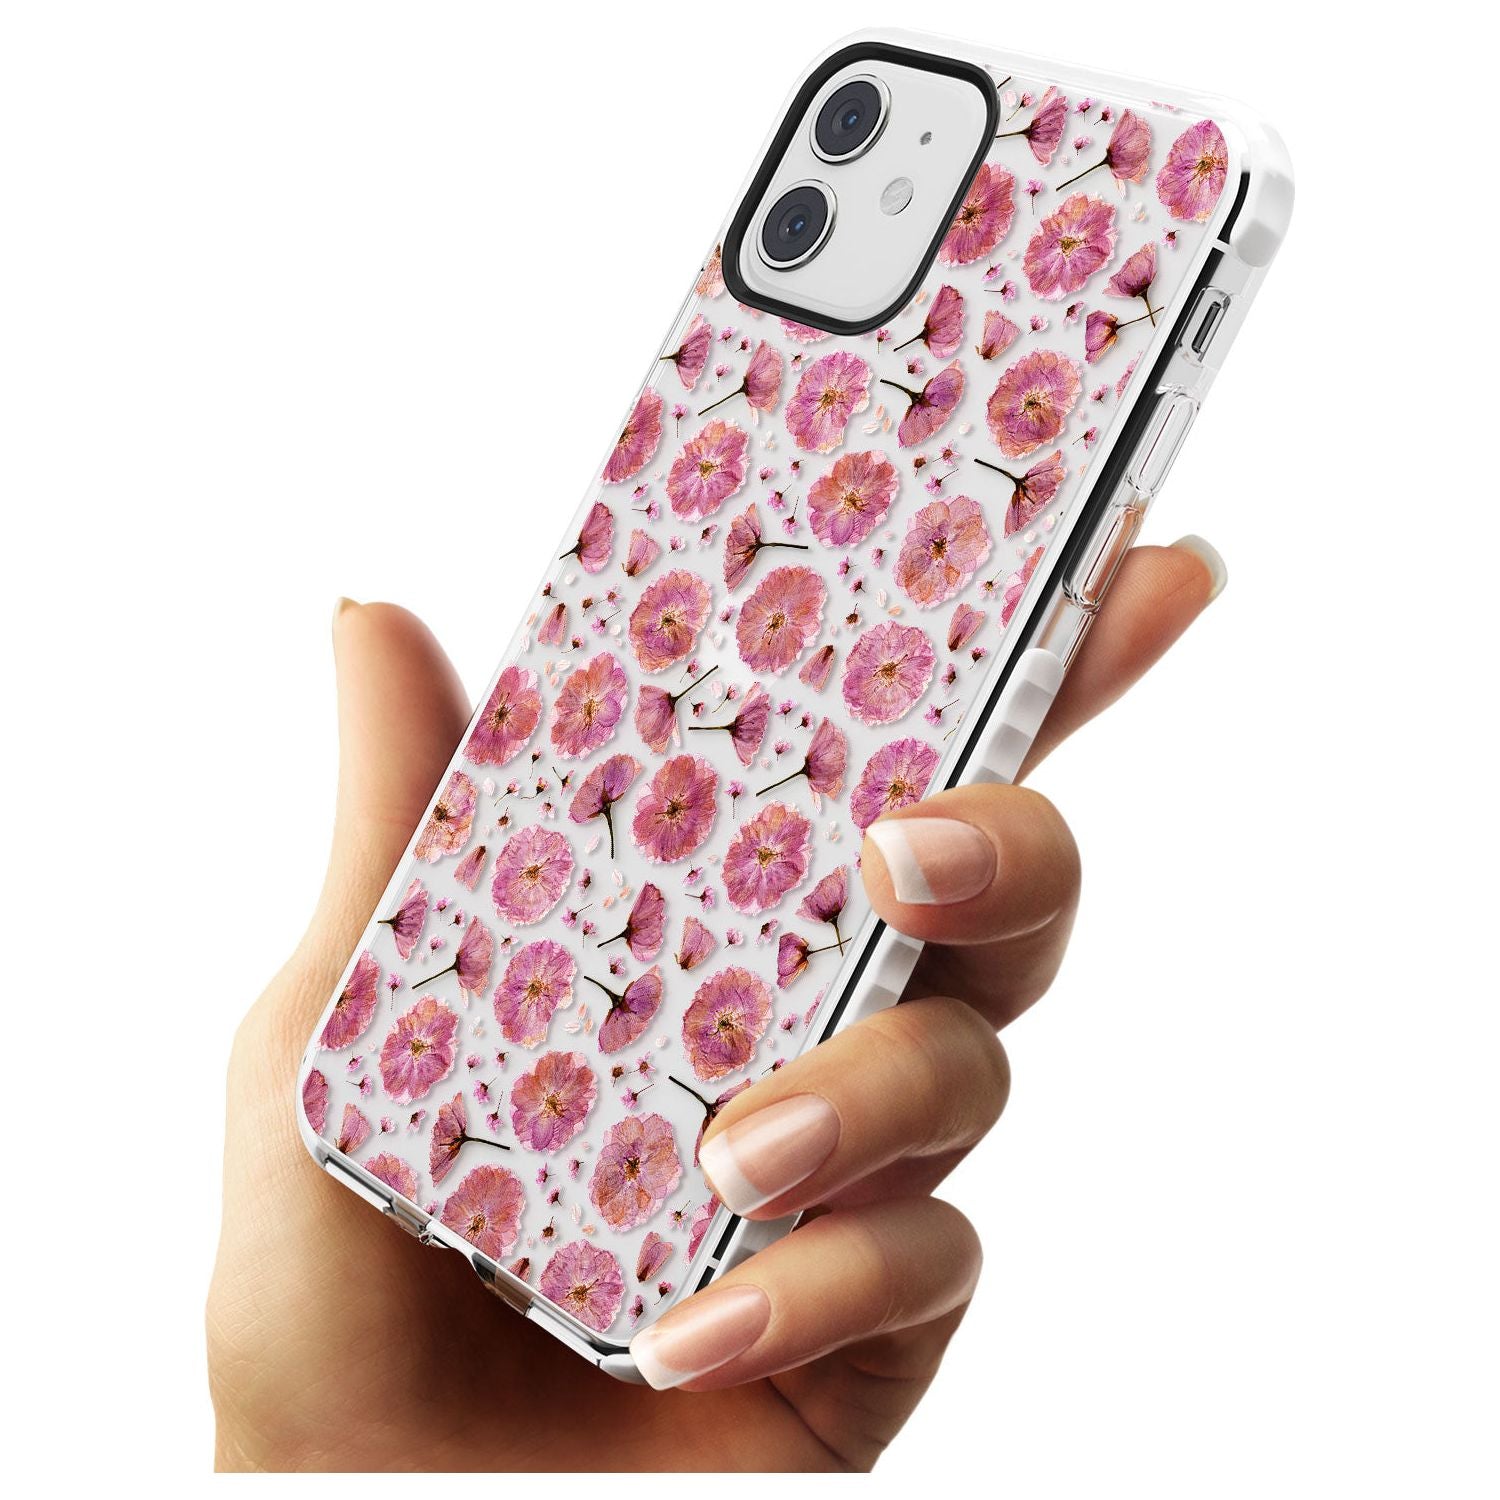 Pink Flowers & Blossoms Transparent Design Impact Phone Case for iPhone 11